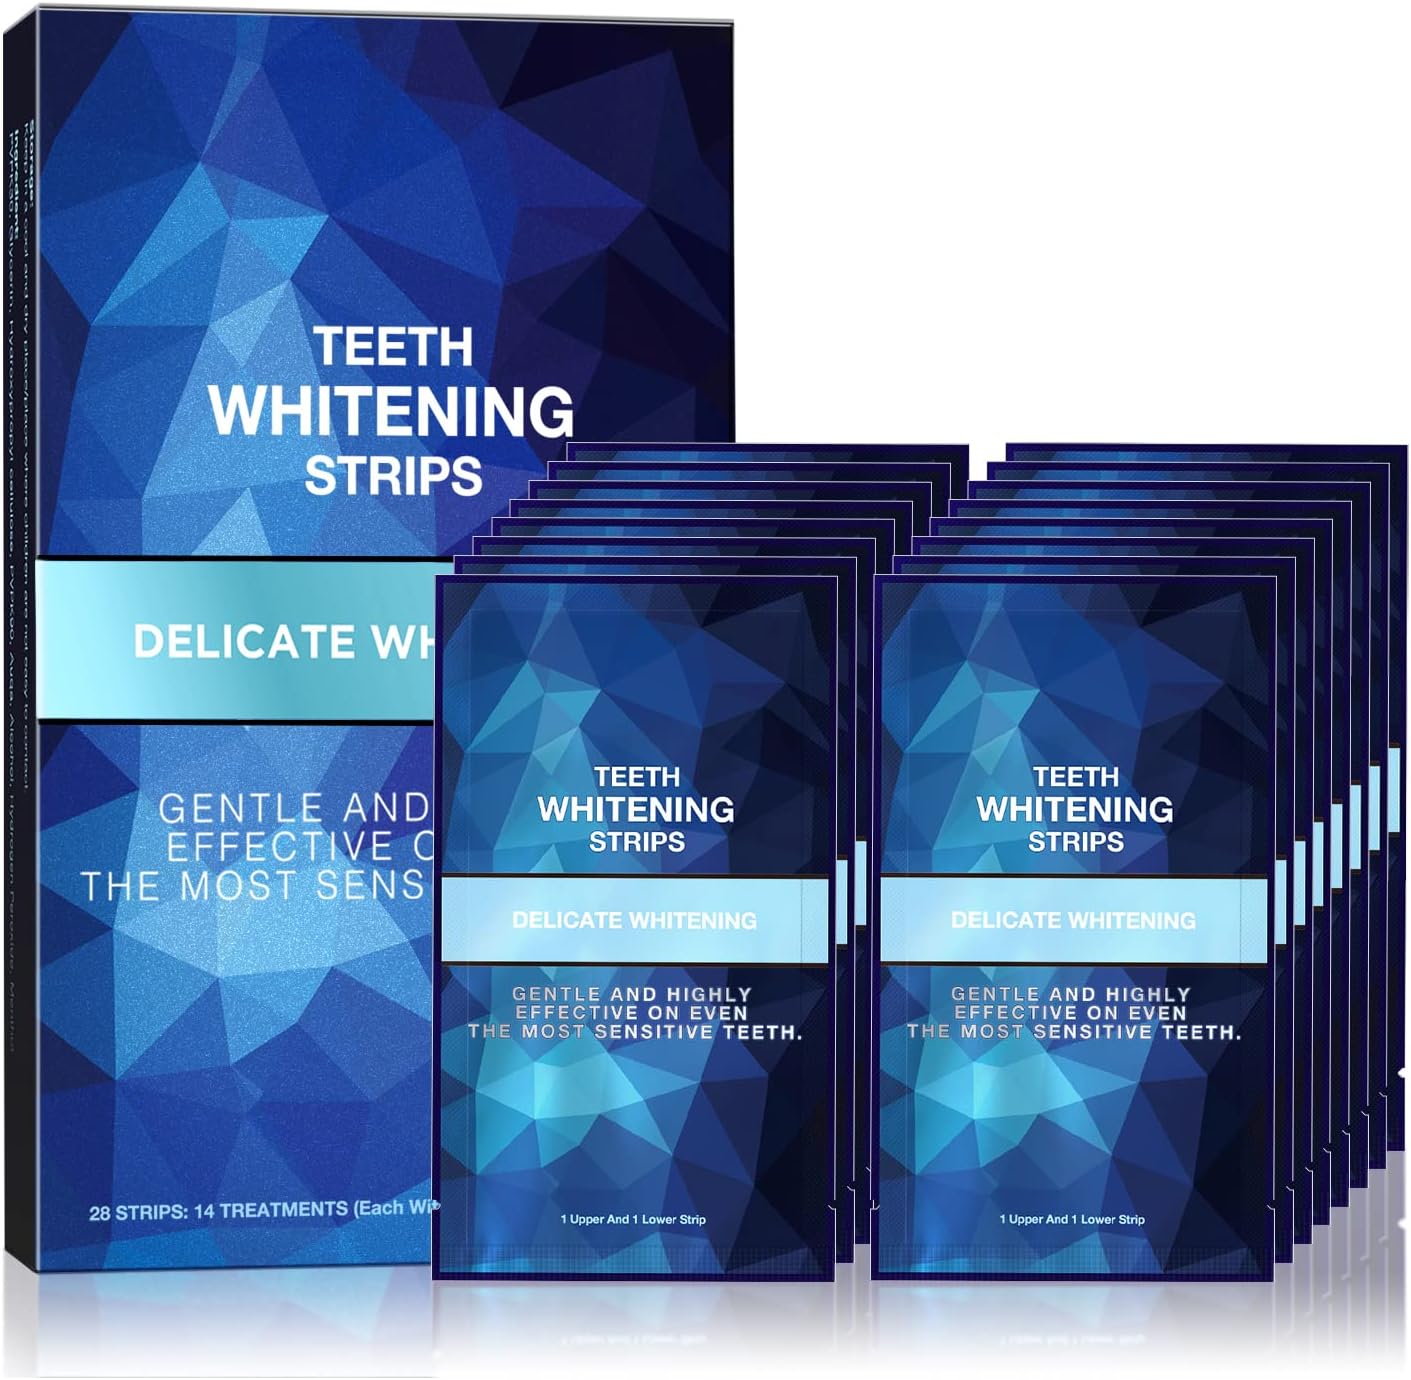 teeth whitening before and after